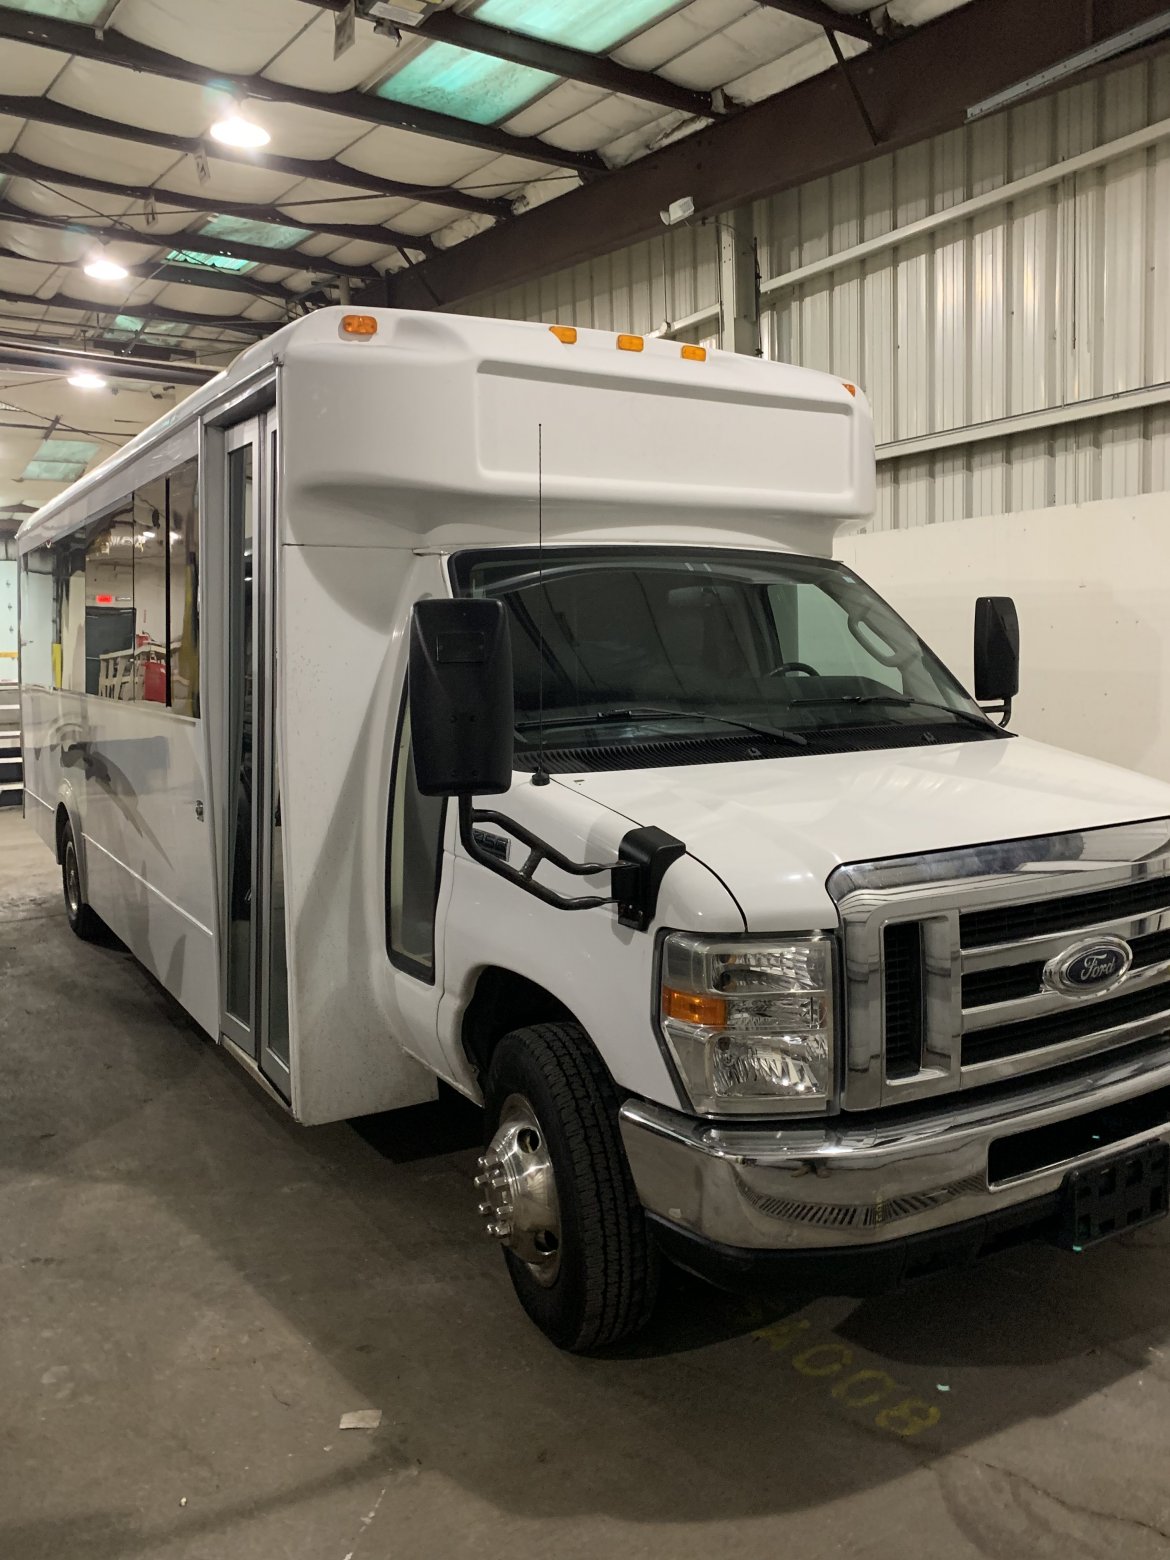 Limo Bus for sale: 2011 Ford E-450 by LGE